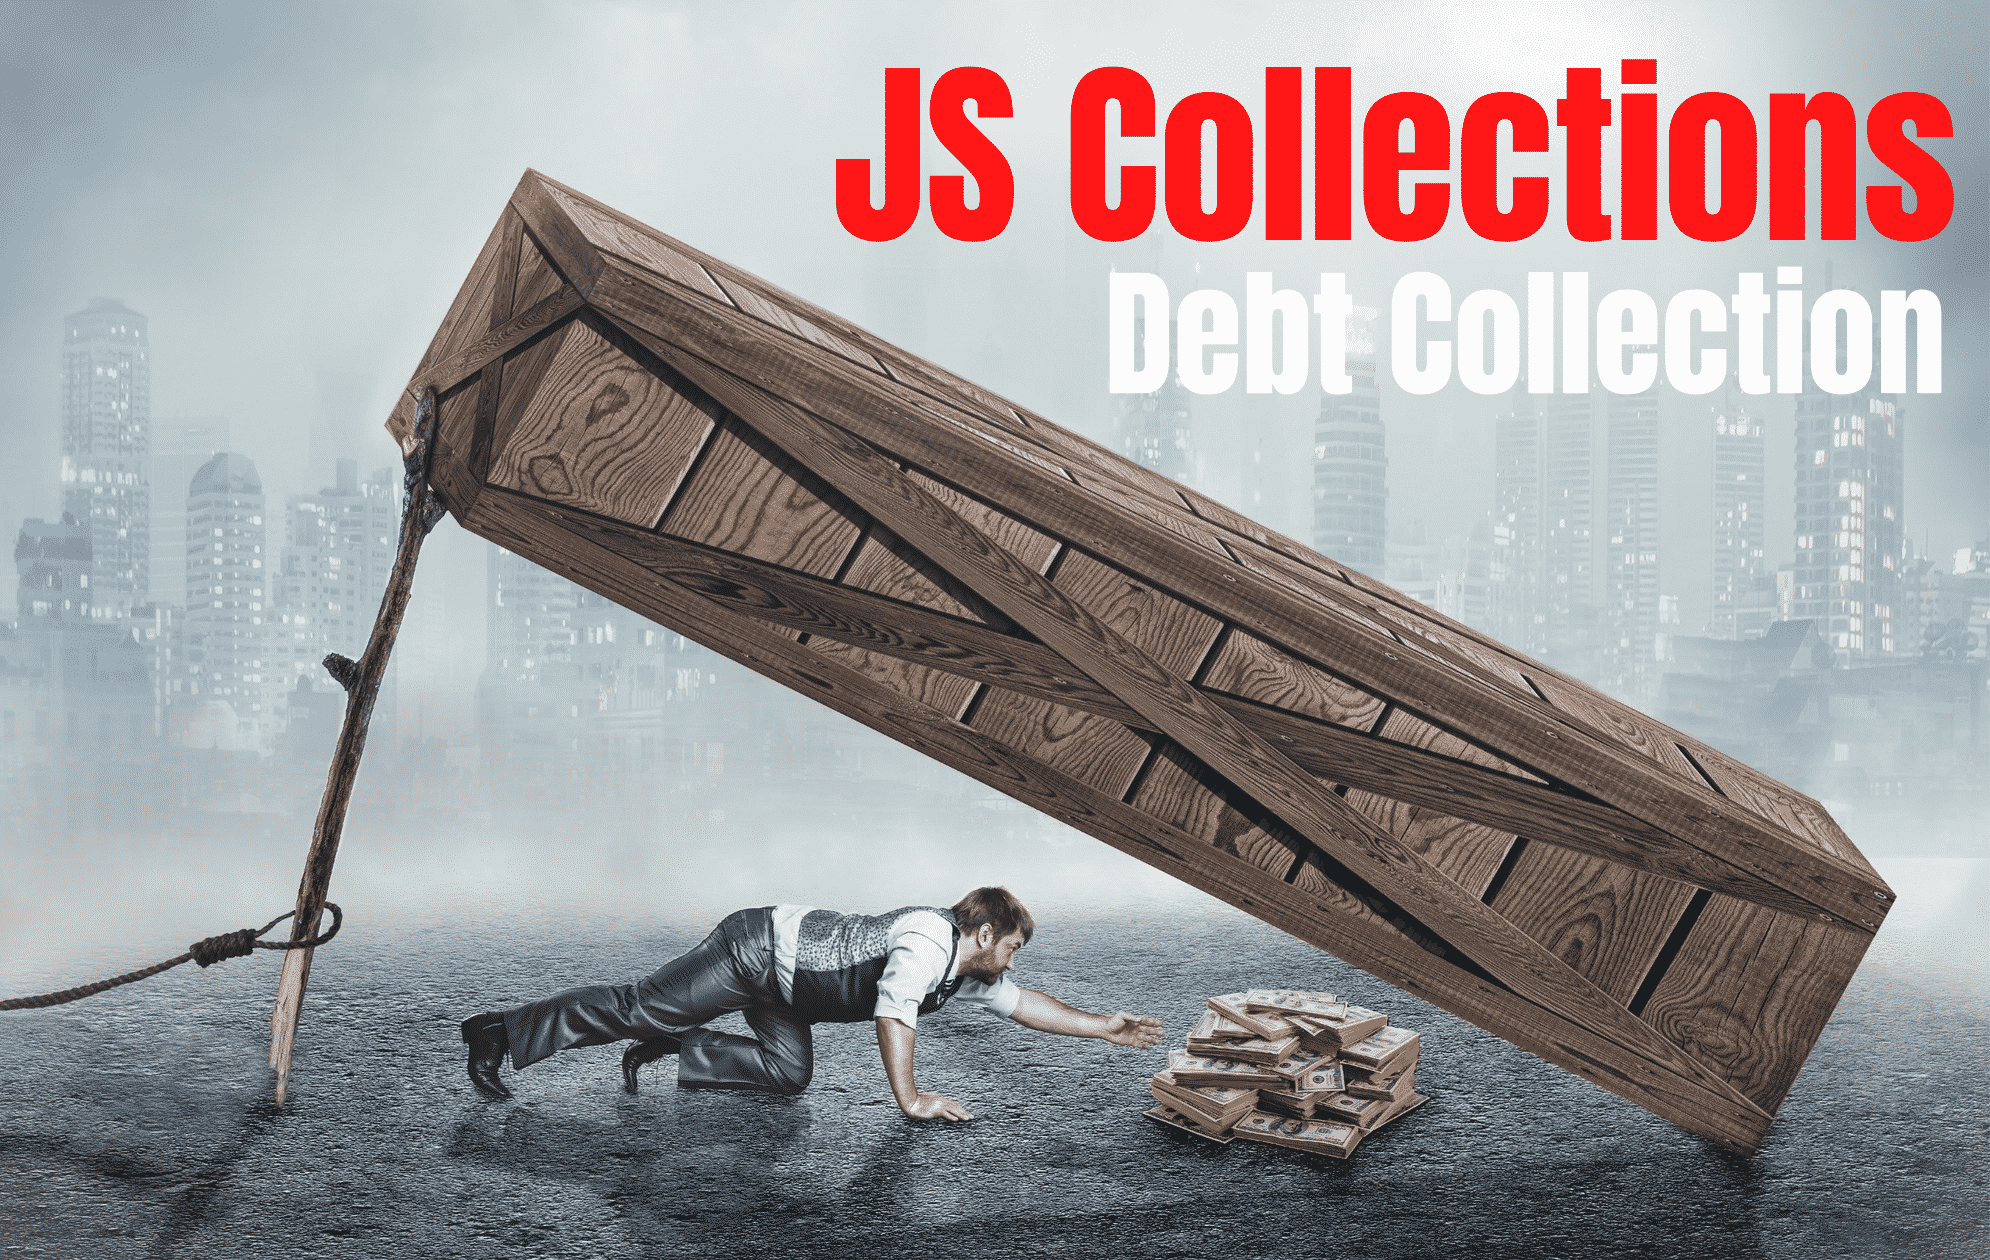 JS-collections-debt-collection